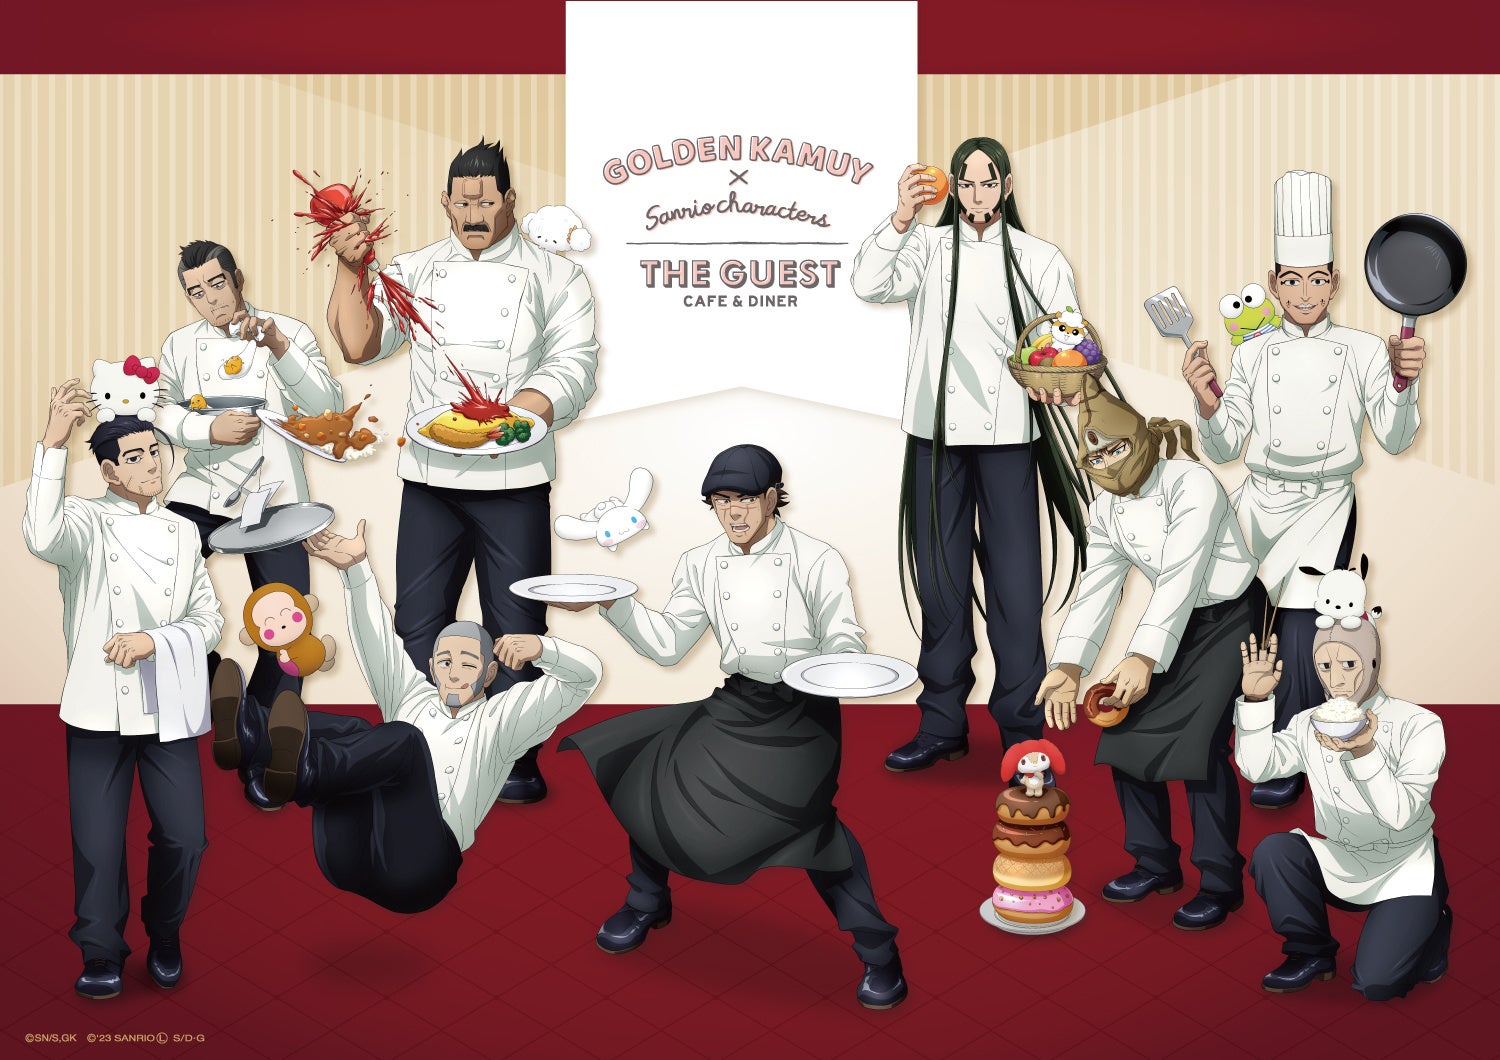 「GOLDEN KAMUY × Sanrio characters ×THE GUEST cafe&diner」池袋・名古屋・心斎橋のTHE GUEST cafe&dinerにて開催決定!!